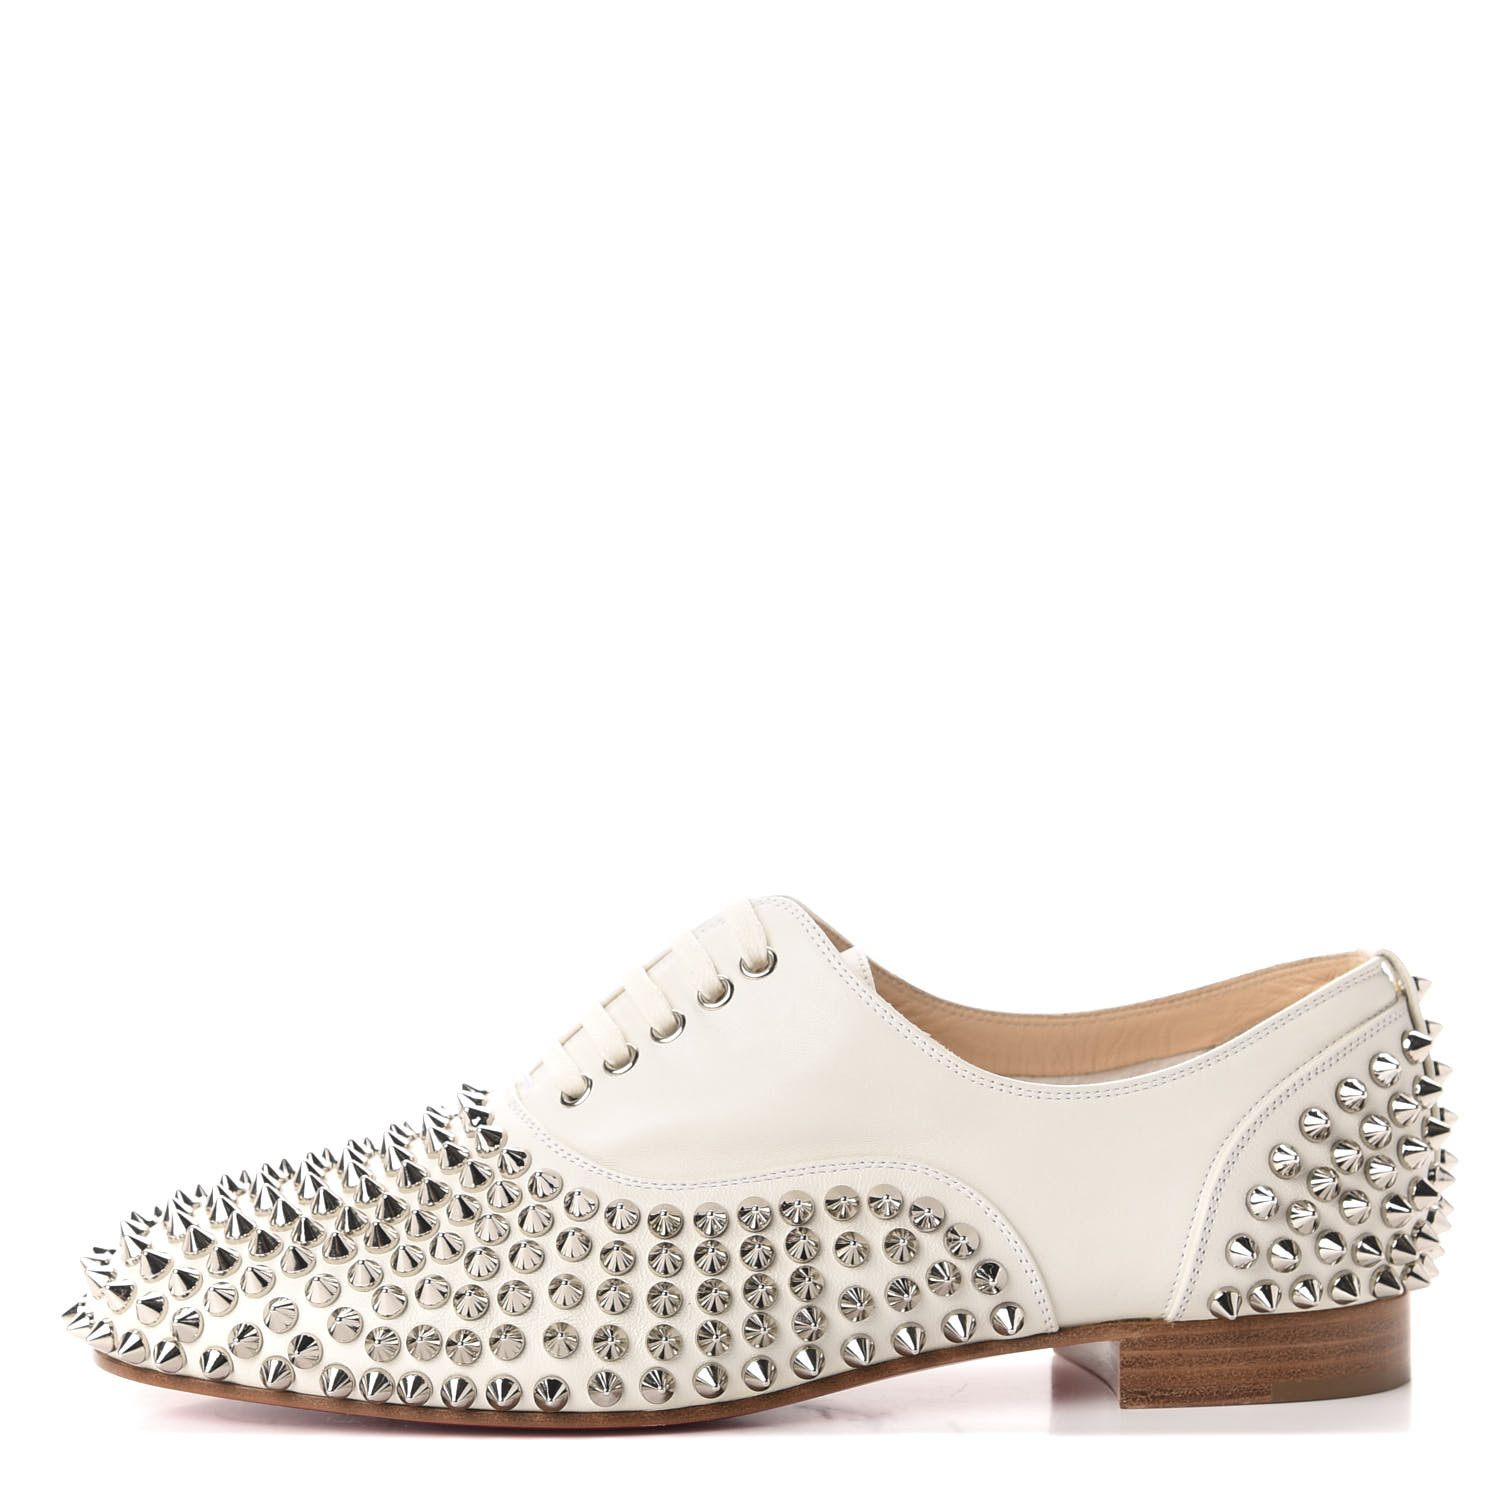 CHRISTIAN LOUBOUTIN Nappa Freddy Spikes Donna Flat Sneakers 38 Silver FASHIONPHILE